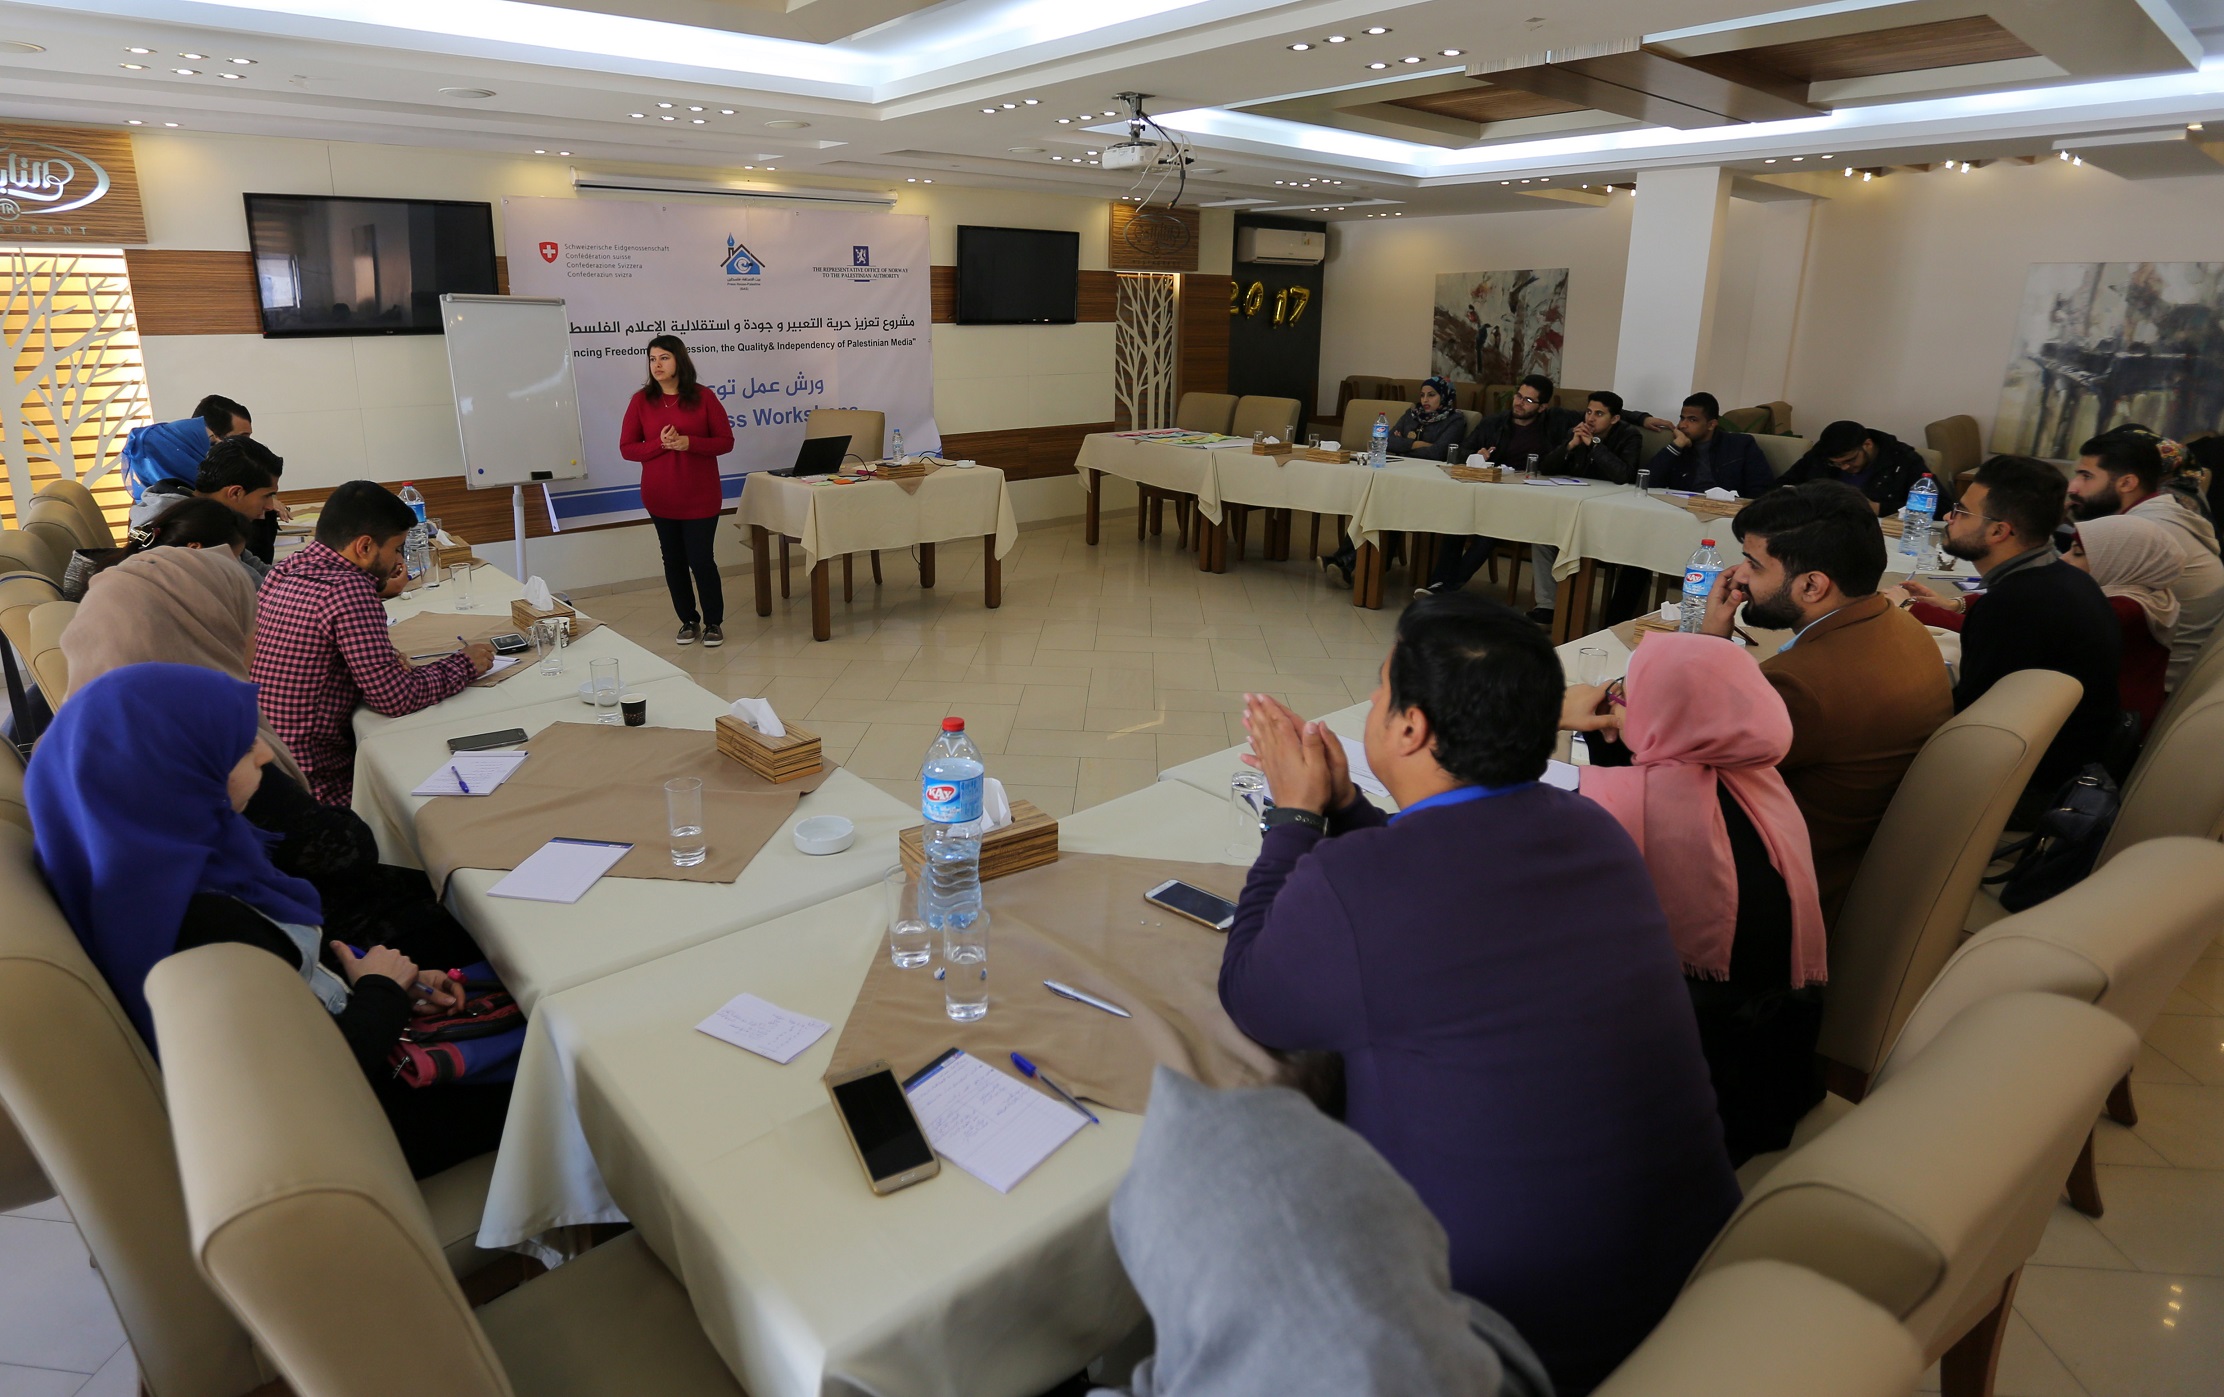 Press House Holds an Awareness Workshop about Gender